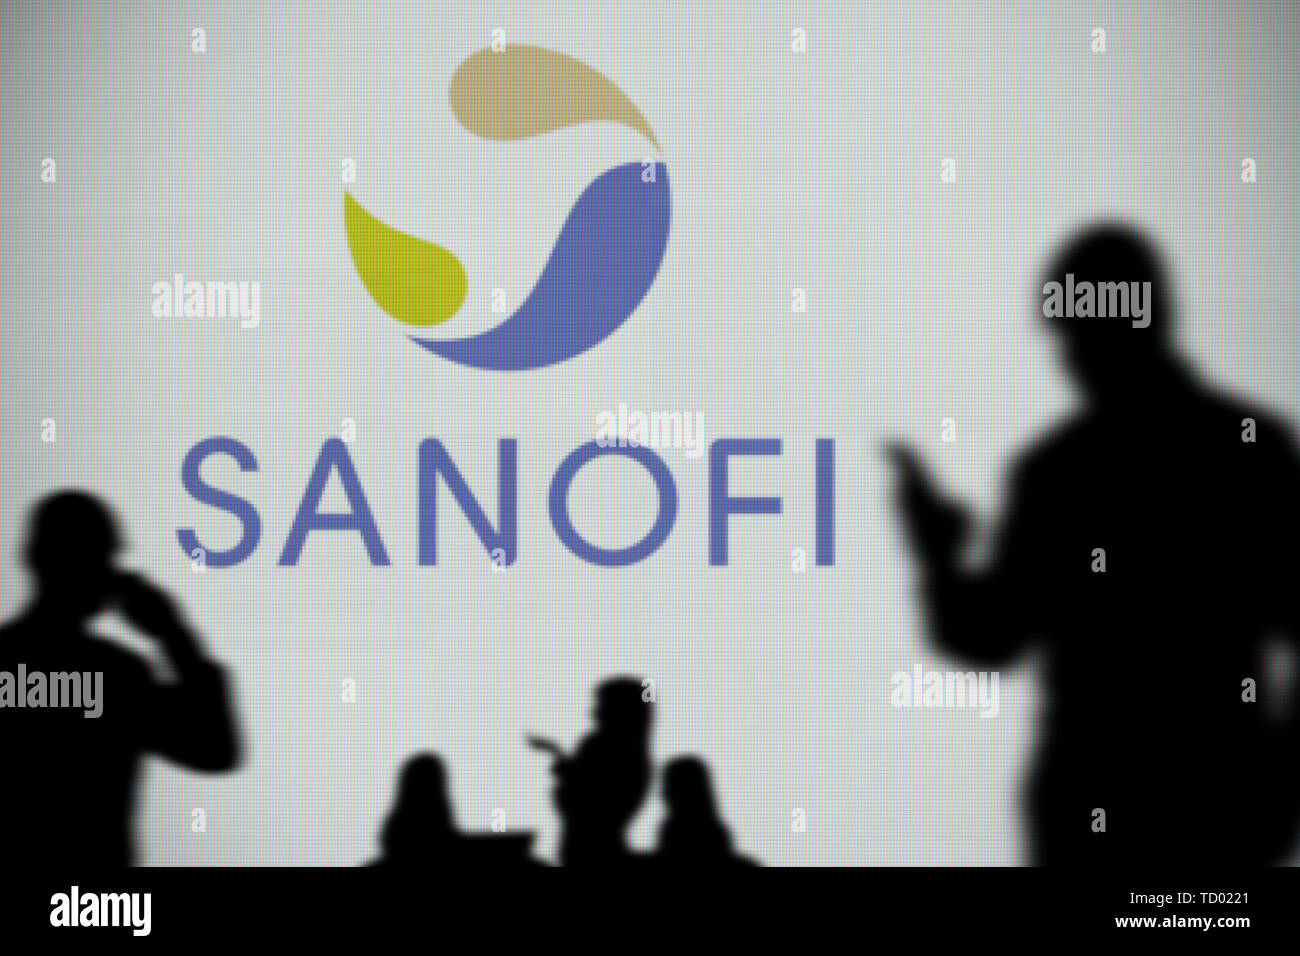 The Sanofi logo is seen on an LED screen in the background while a silhouetted person uses a smartphone in the foreground (Editorial use only) Stock Photo